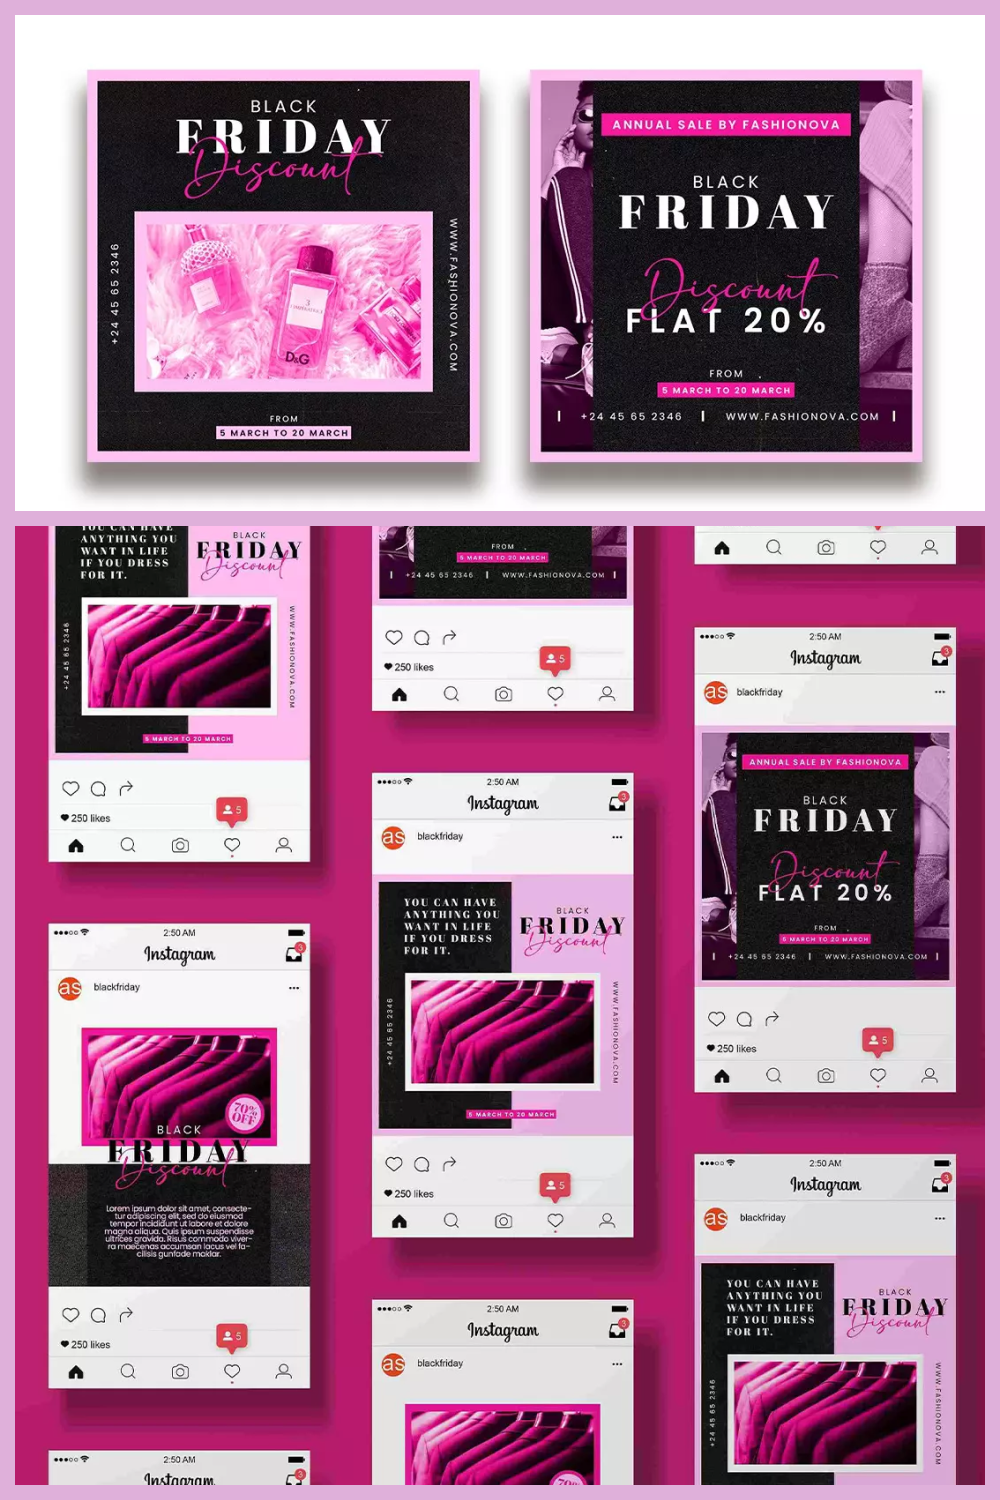 Collage of flyers with black and white text on a pink background.